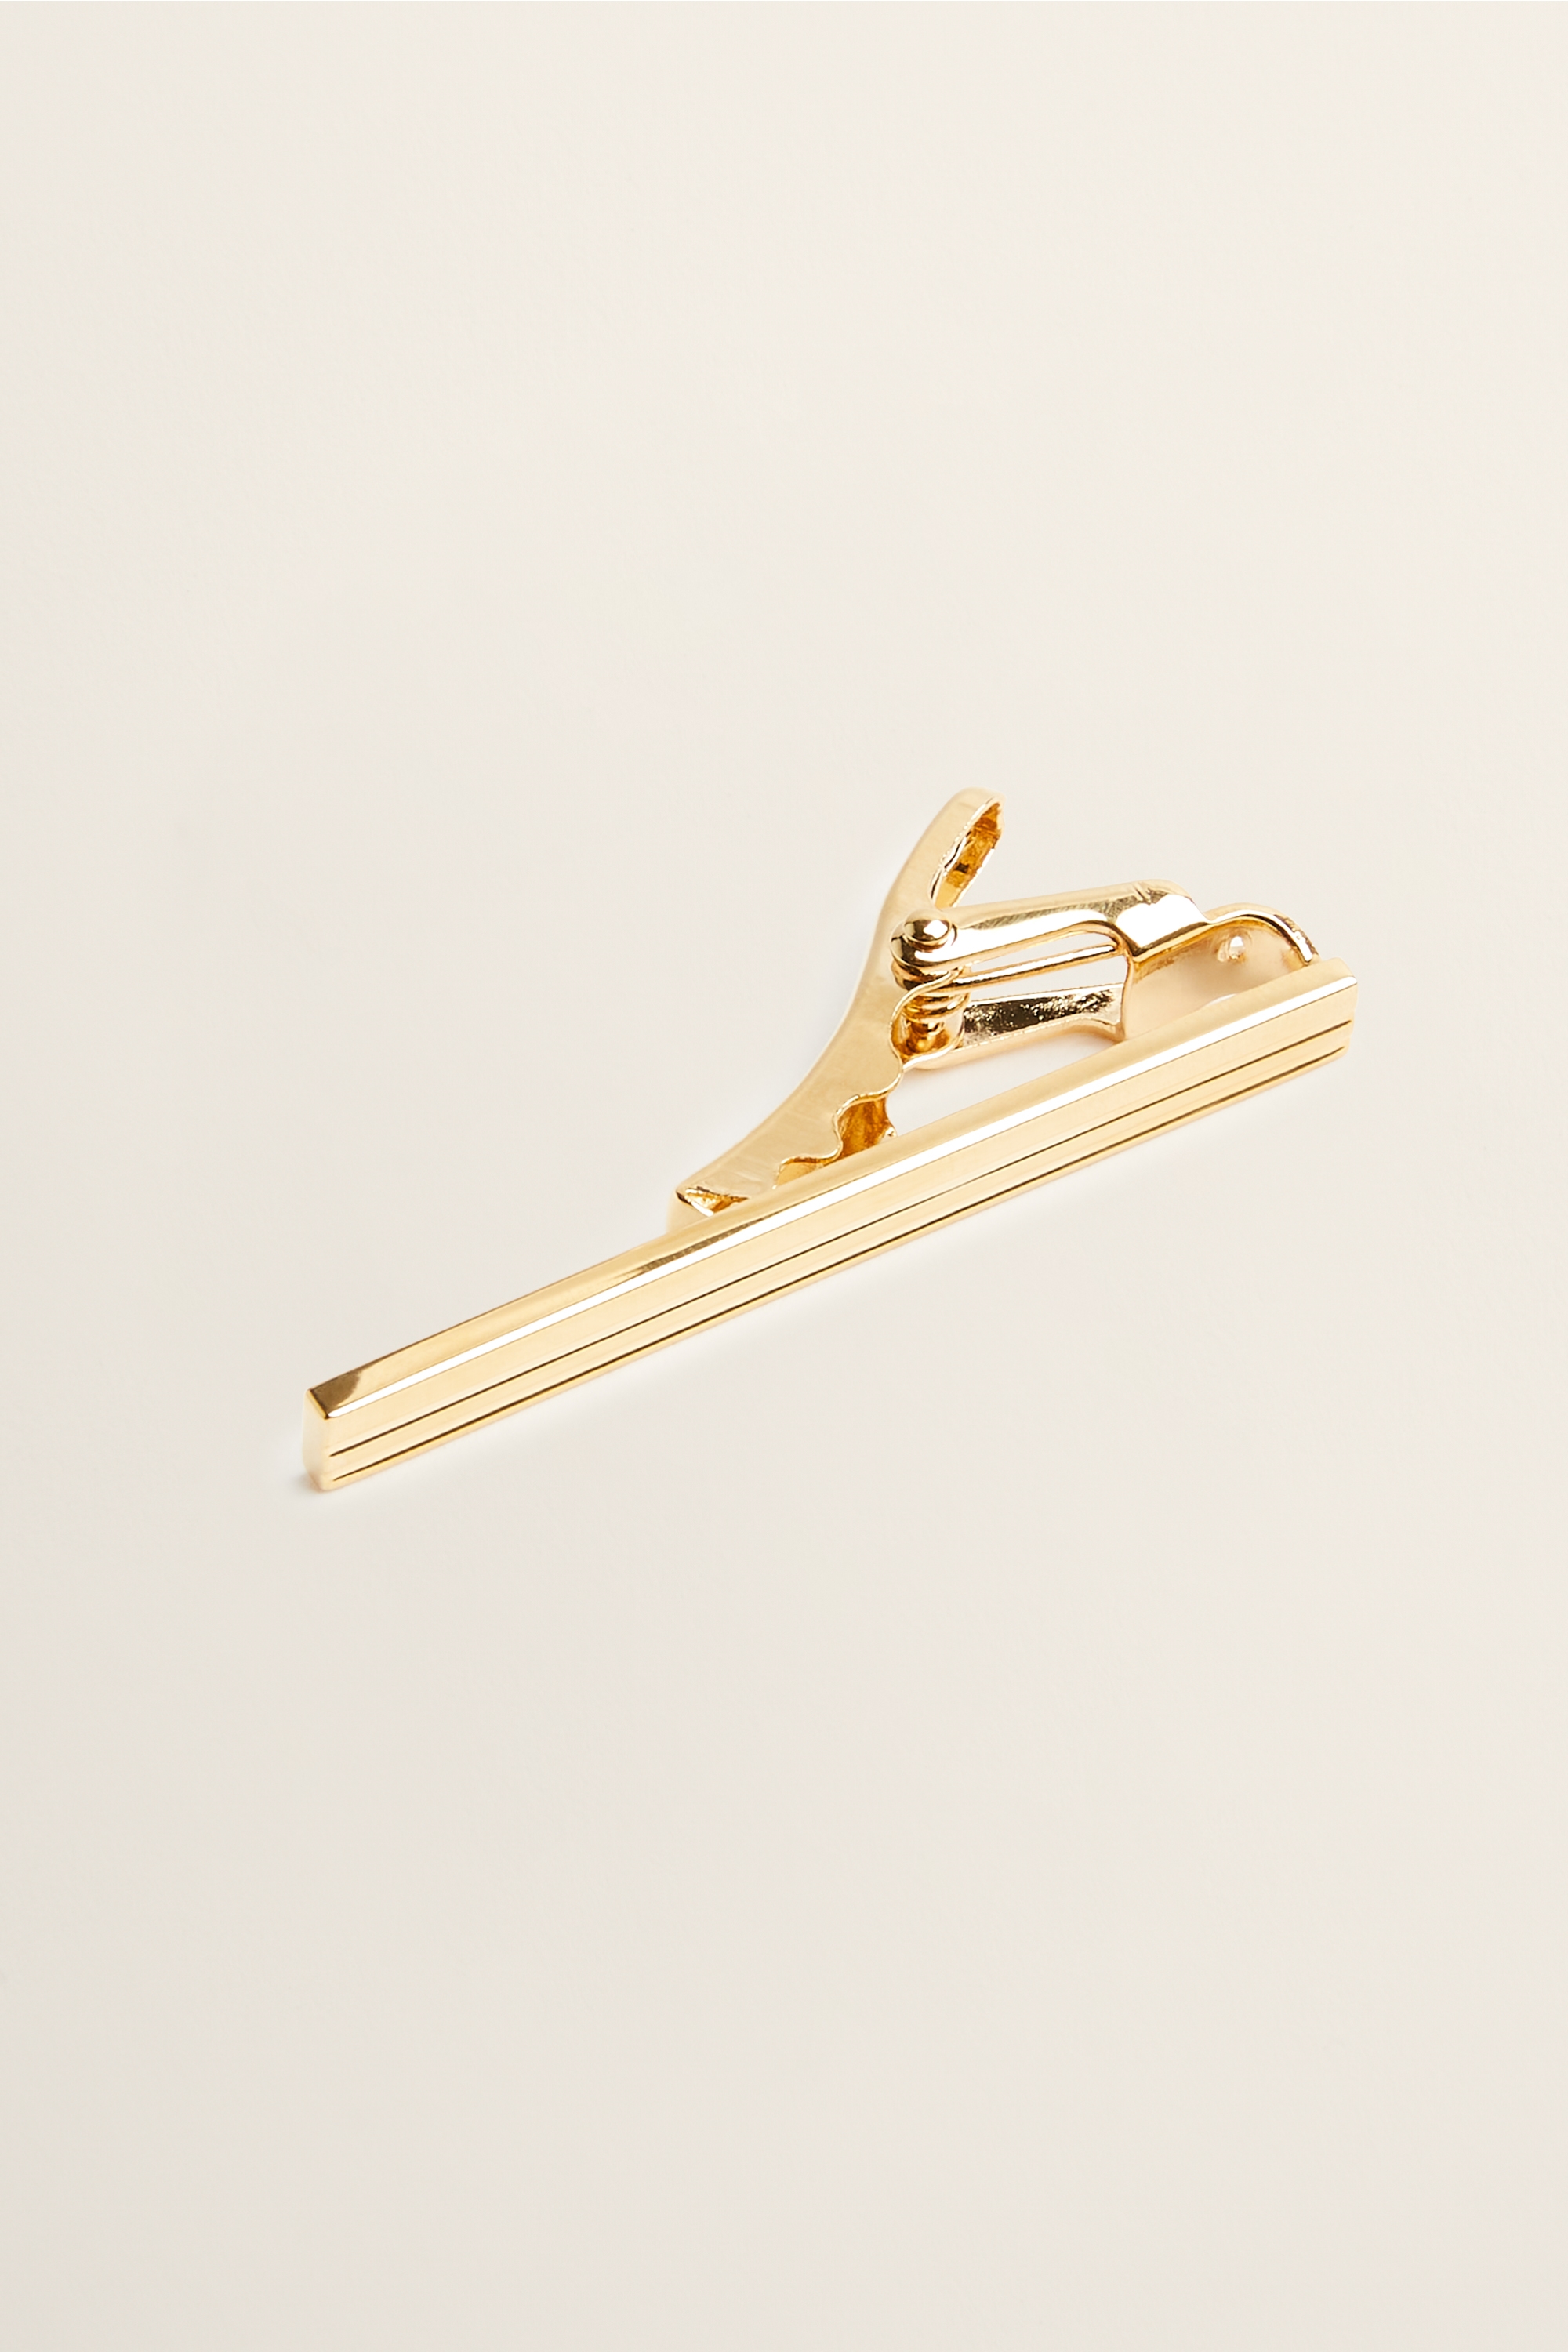 Brushed Gold Tie Clip | Buy Online at Moss